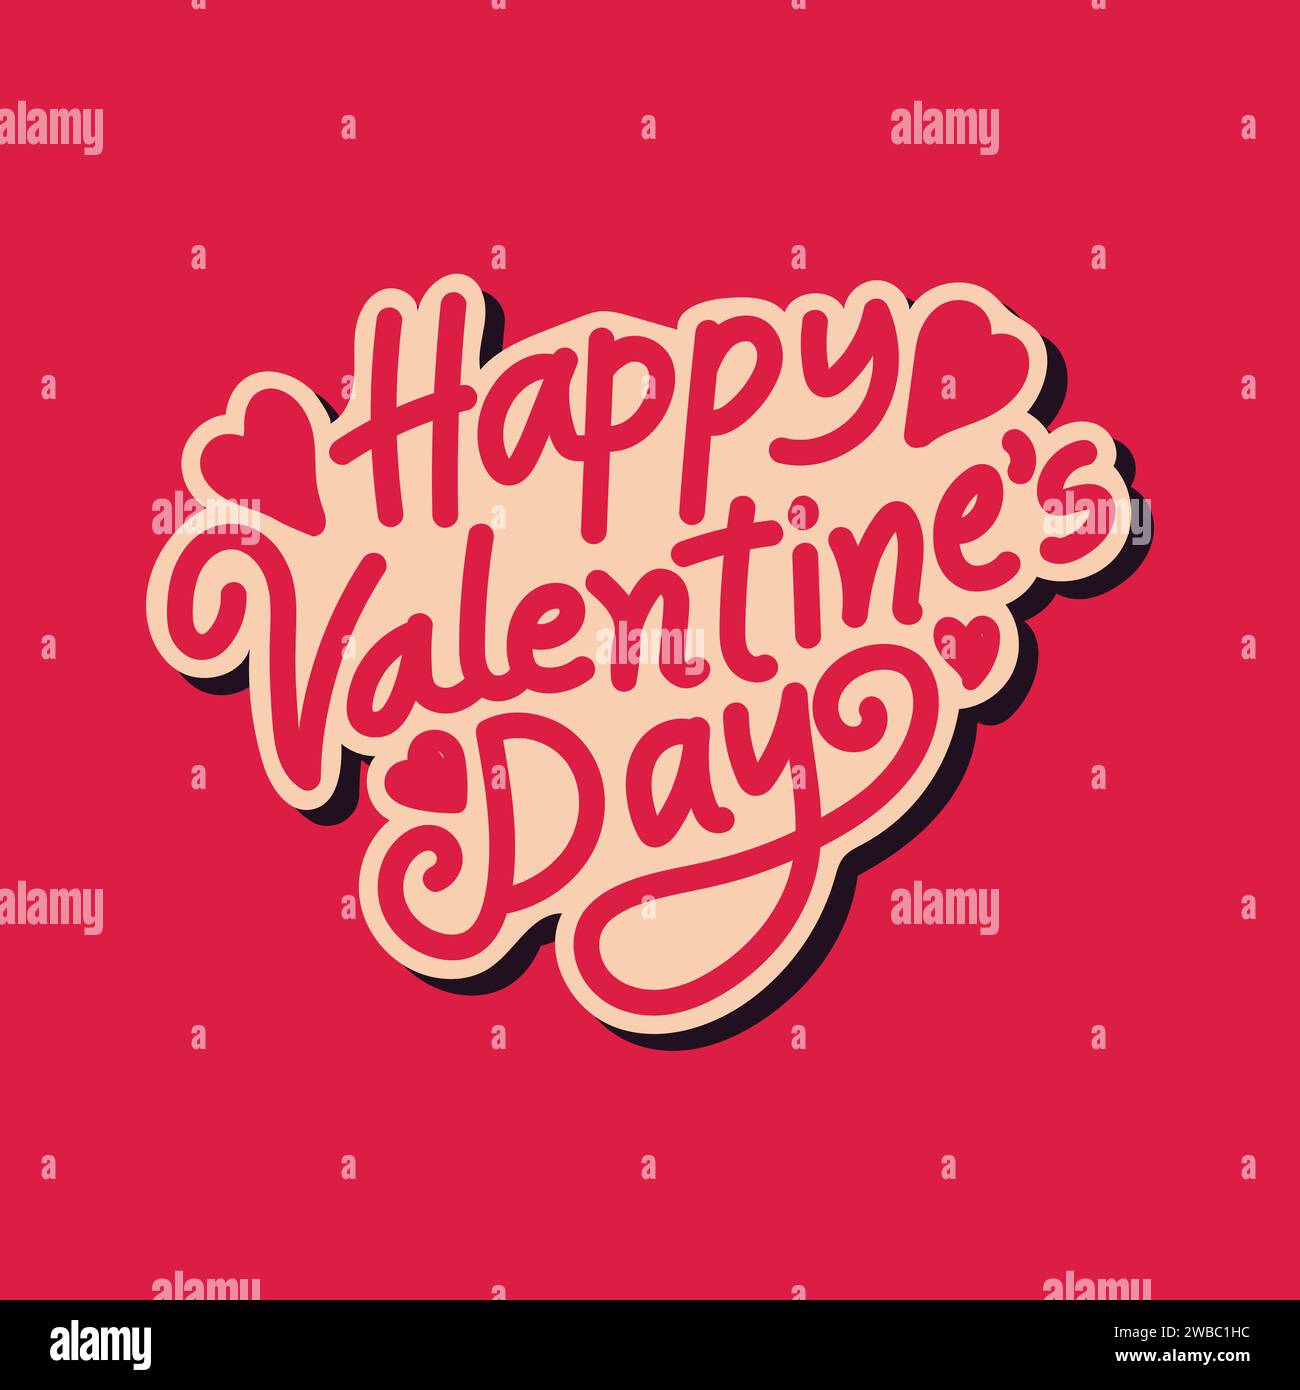 Happy Valentines Day hand lettering vector illustration on red background. Love and romantic concept for celebrating valentine's Day on 14 February. Stock Vector